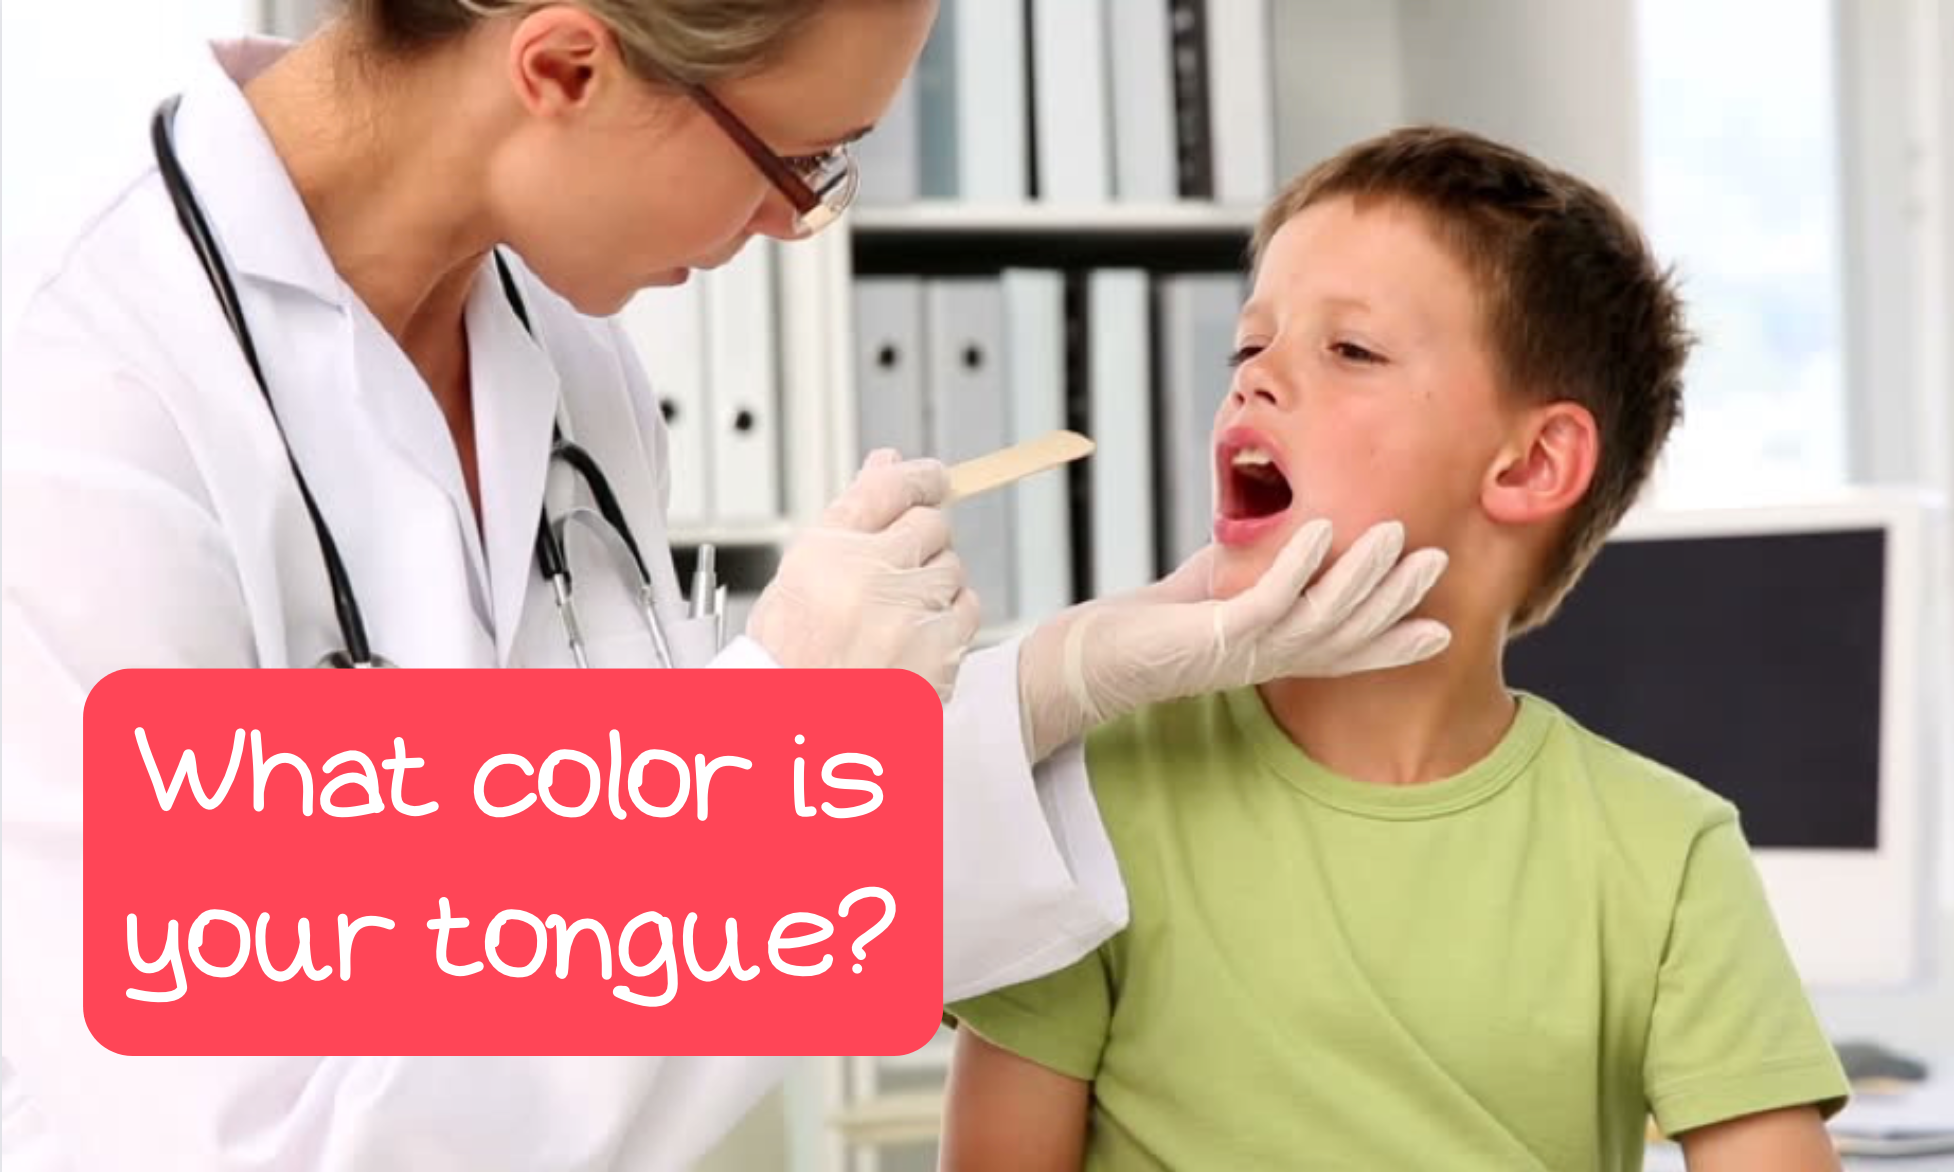 What color is your tongue?